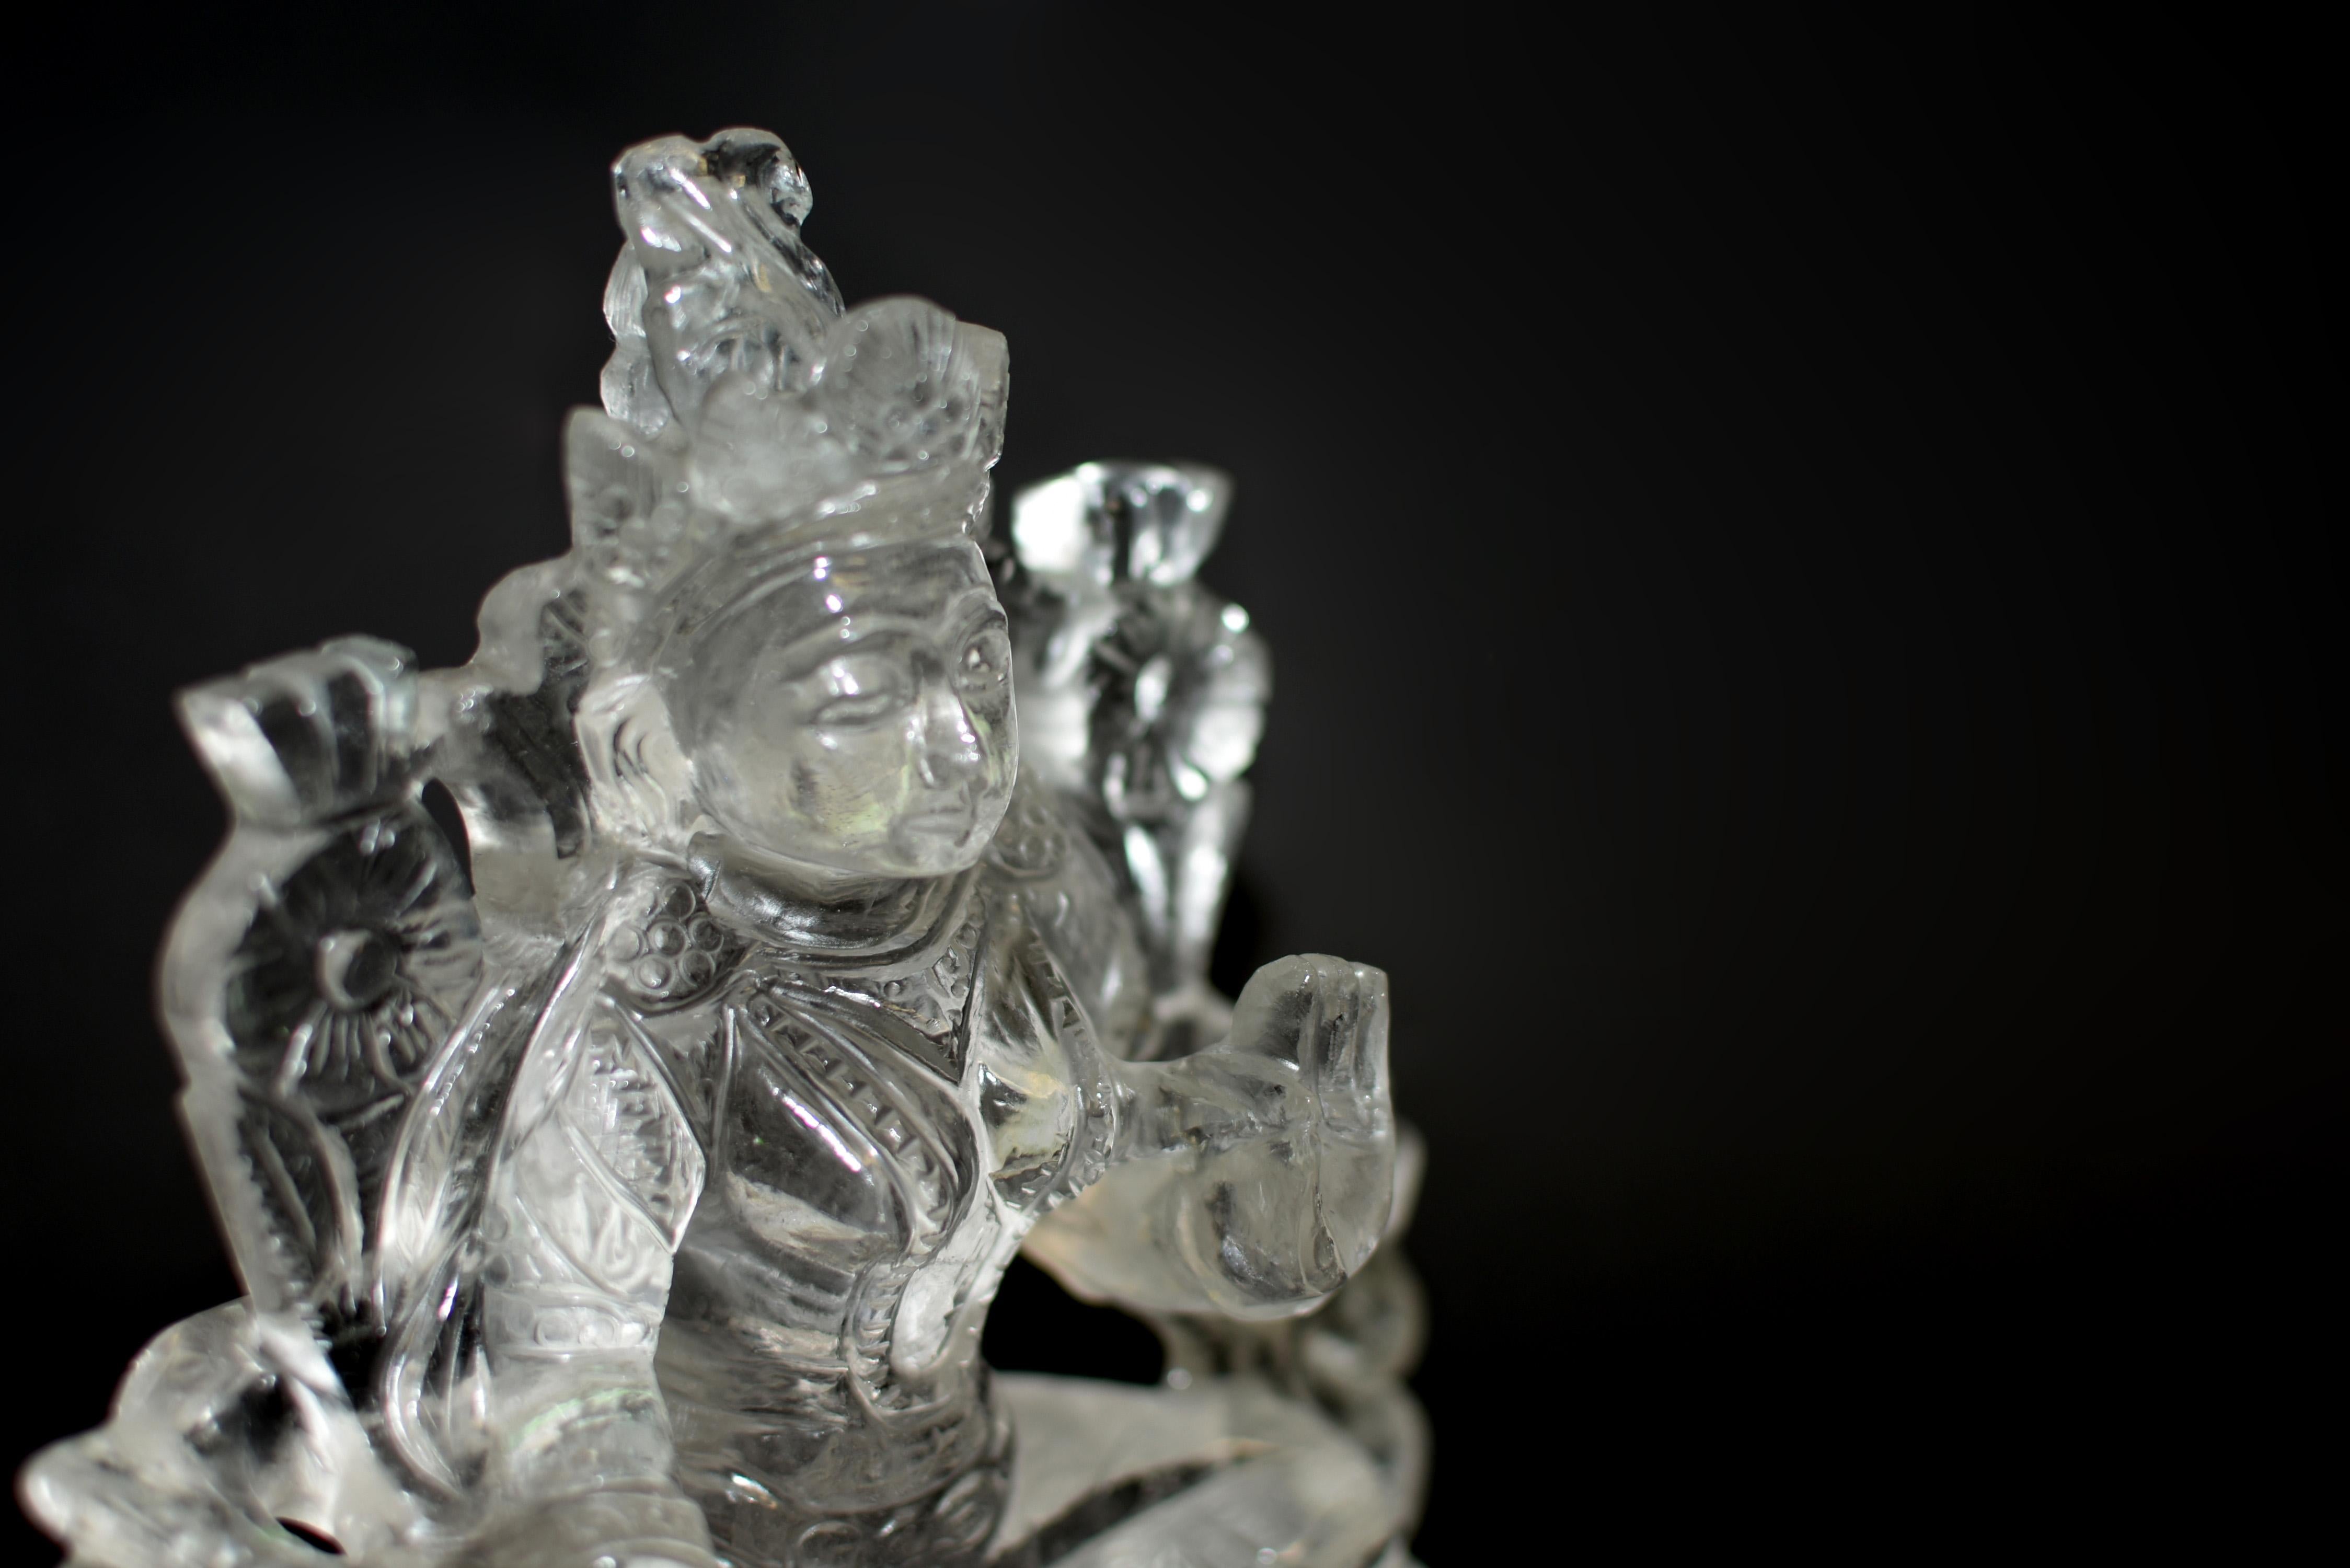 The rare rock crystal statue of the Tibetan Green Tara commands attention with its exquisite craftsmanship and spiritual presence. Seated in Lalitasana on a lotus throne with her pendant foot resting on a smaller lotus, the right hand extends in